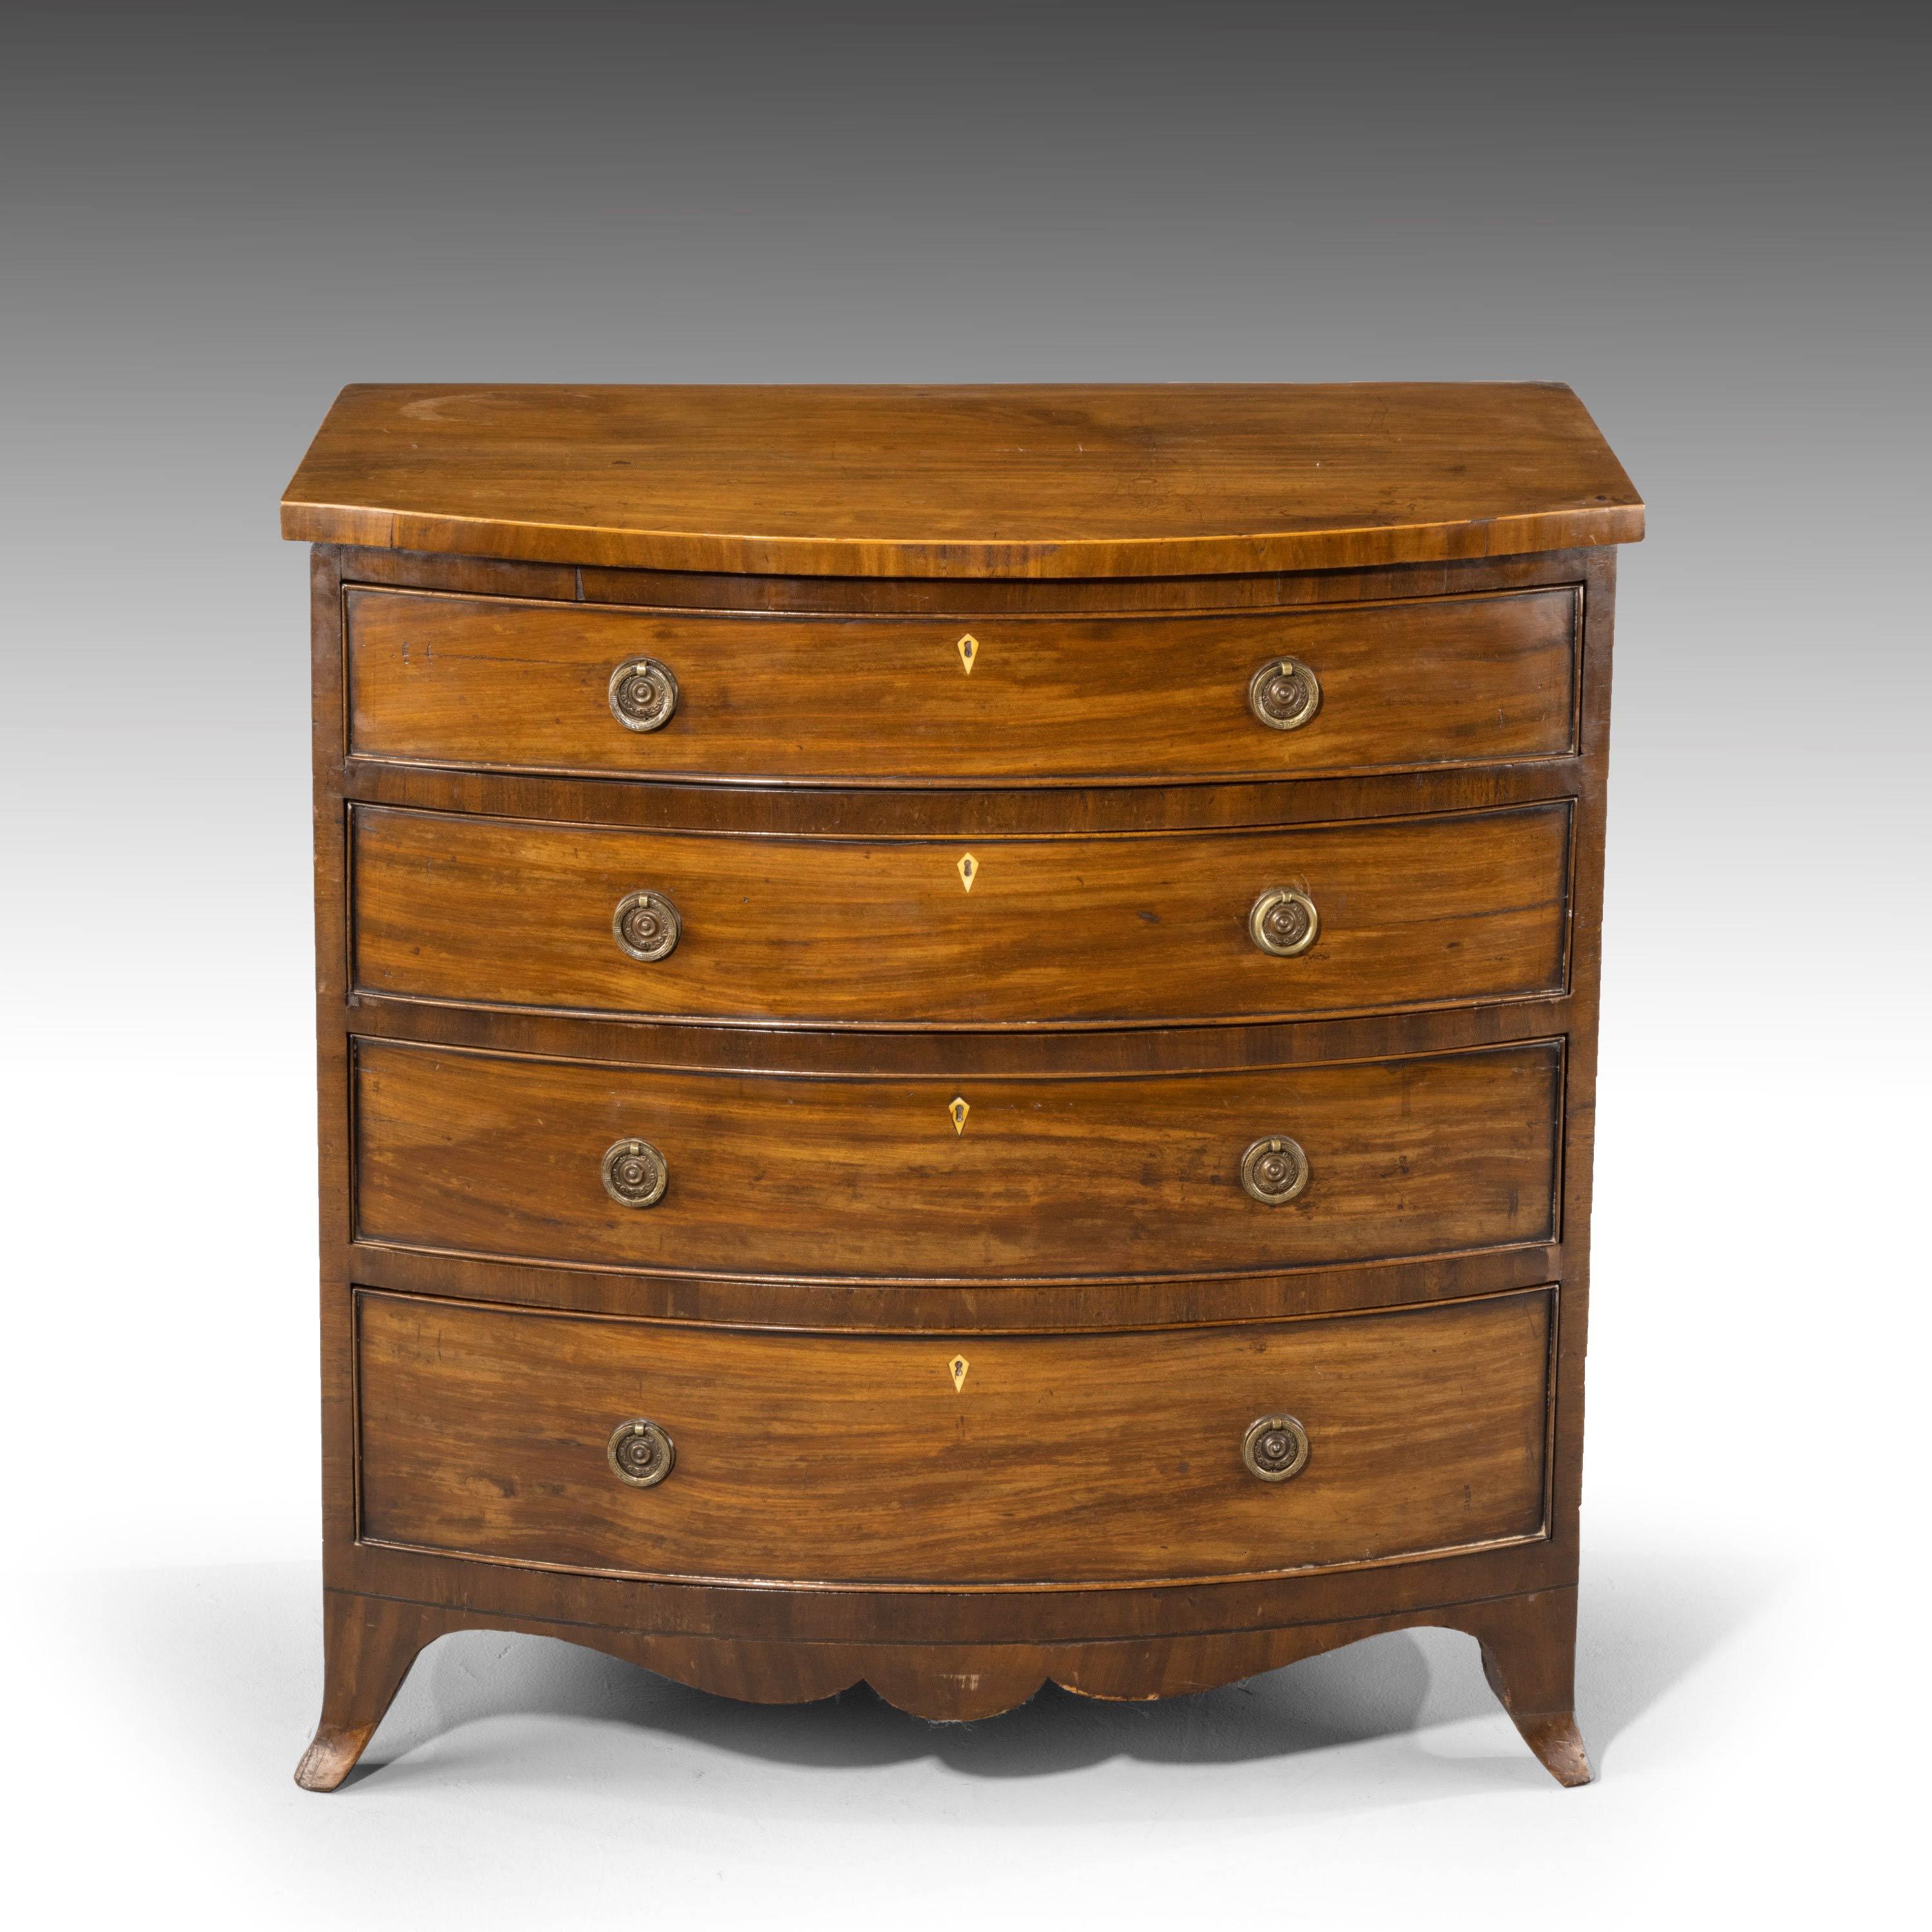 English Particularly Good George III Period Bow-Fronted Chest of Drawers